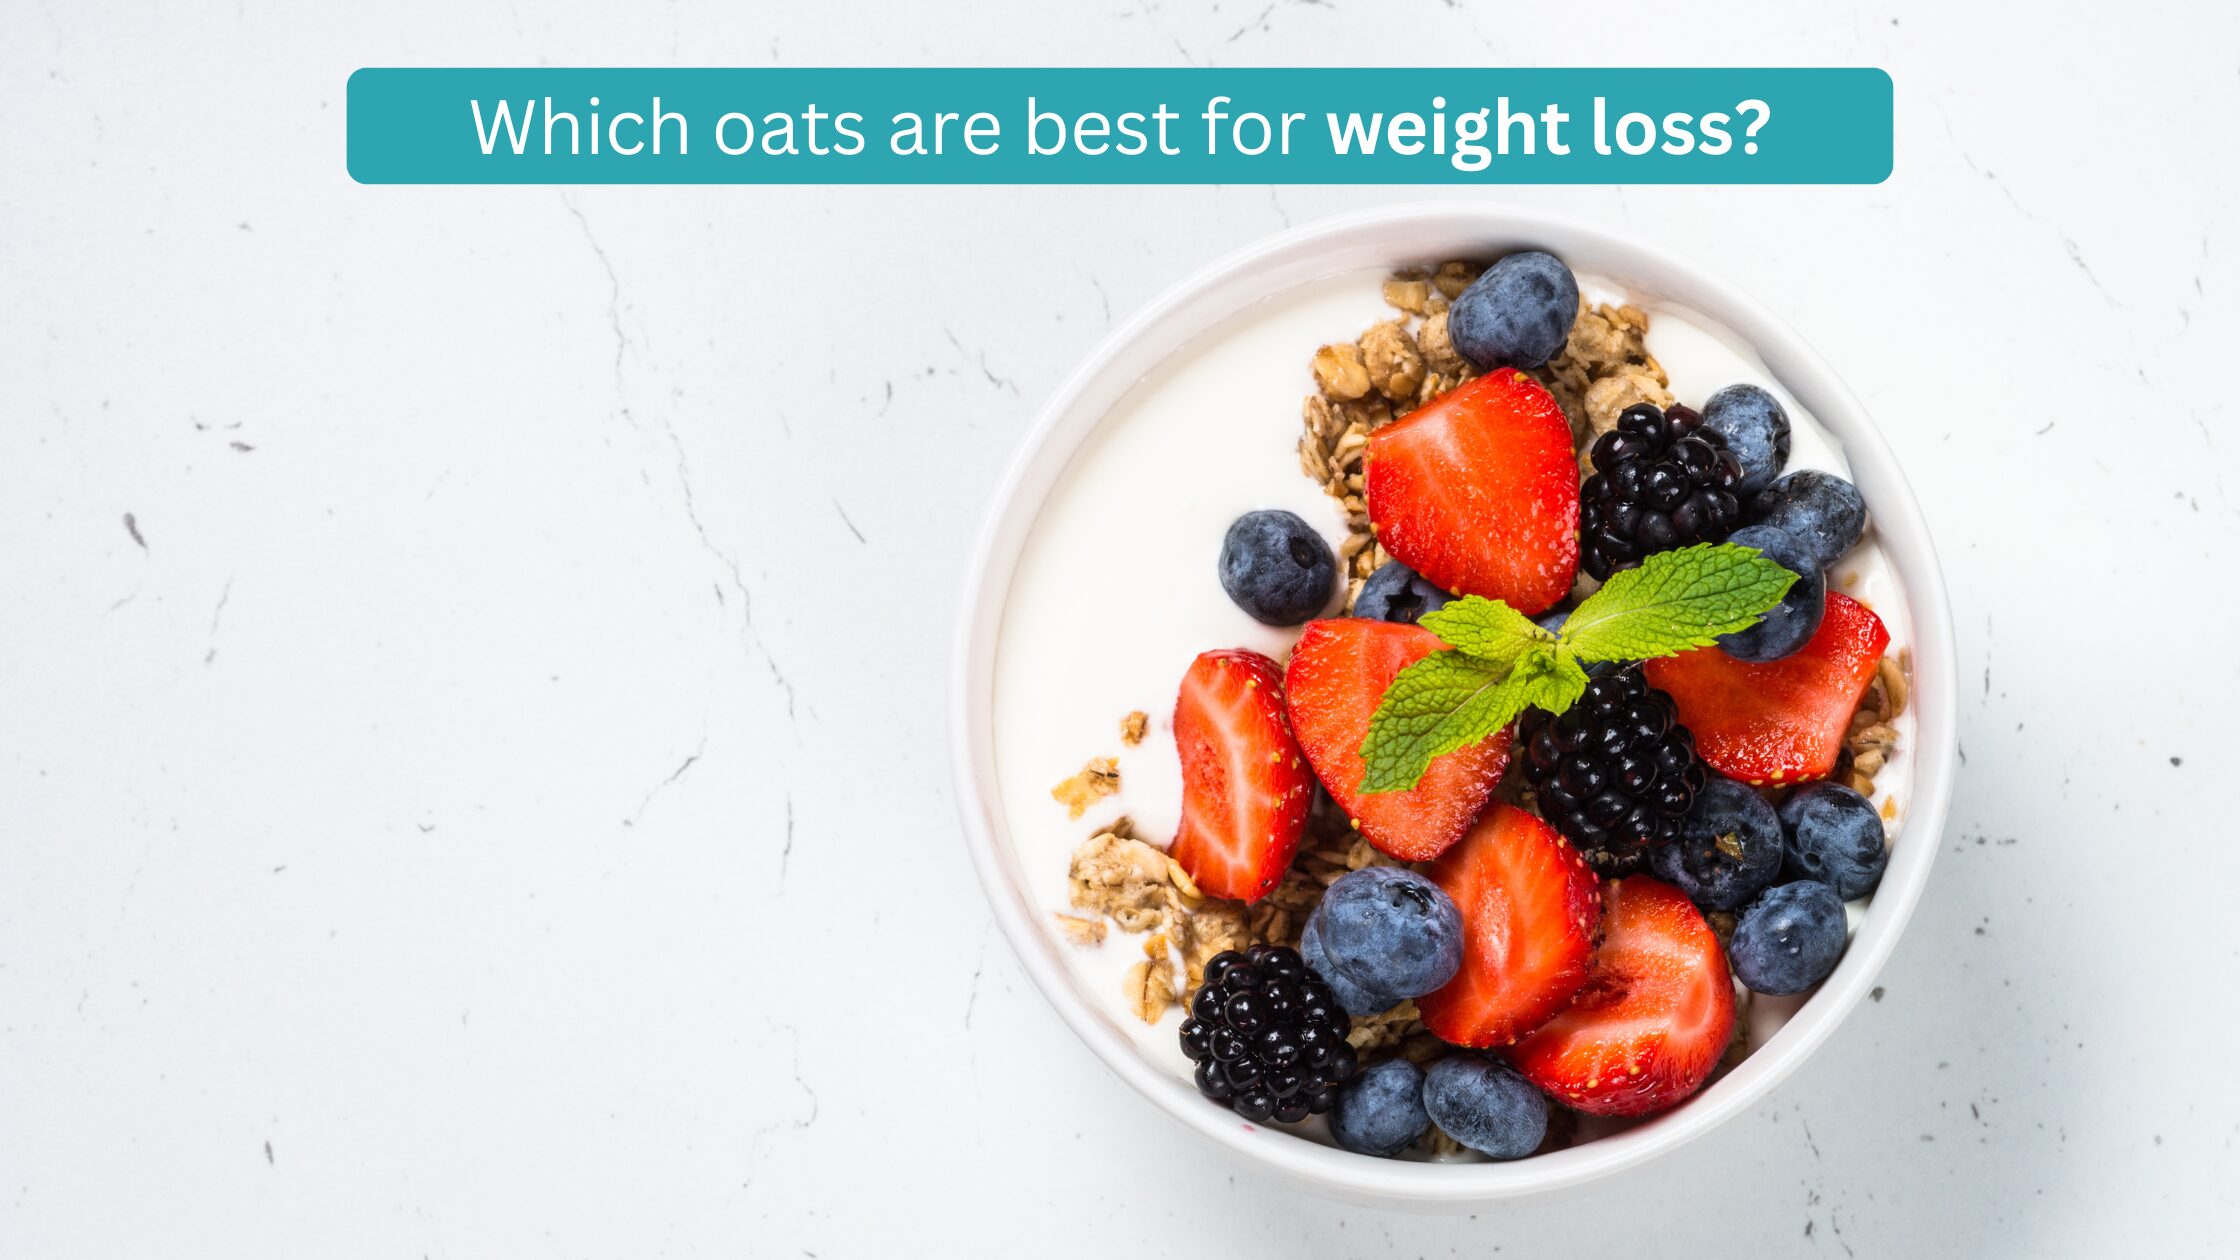 Which oats are best for weight loss?